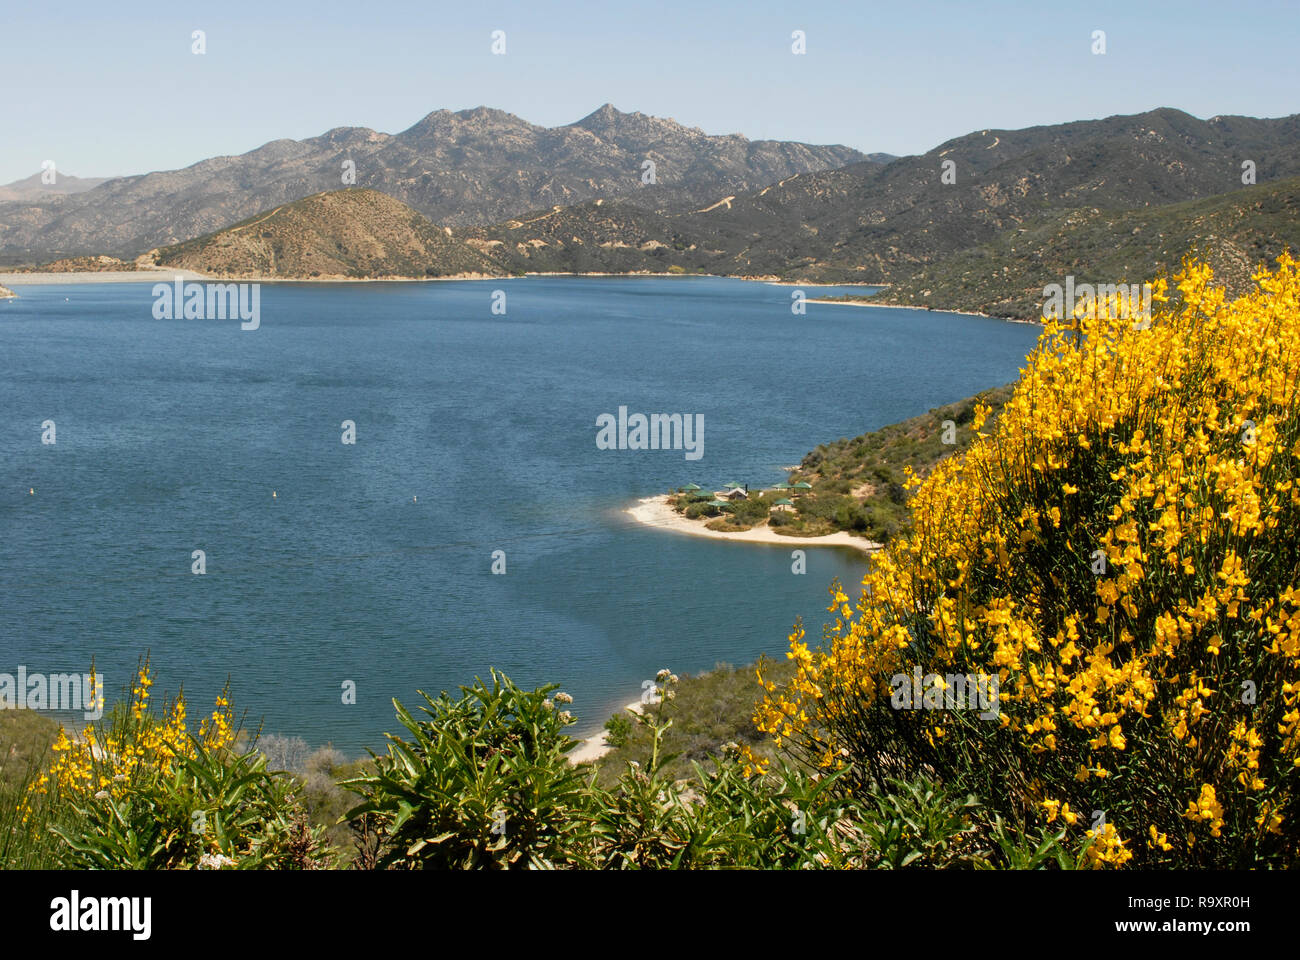 View of Silverwood Lake, California from an overlook on the Rim of the World Scenic Byway. The reservoir was formed in 1971 by the Cedar Springs Dam. Stock Photo